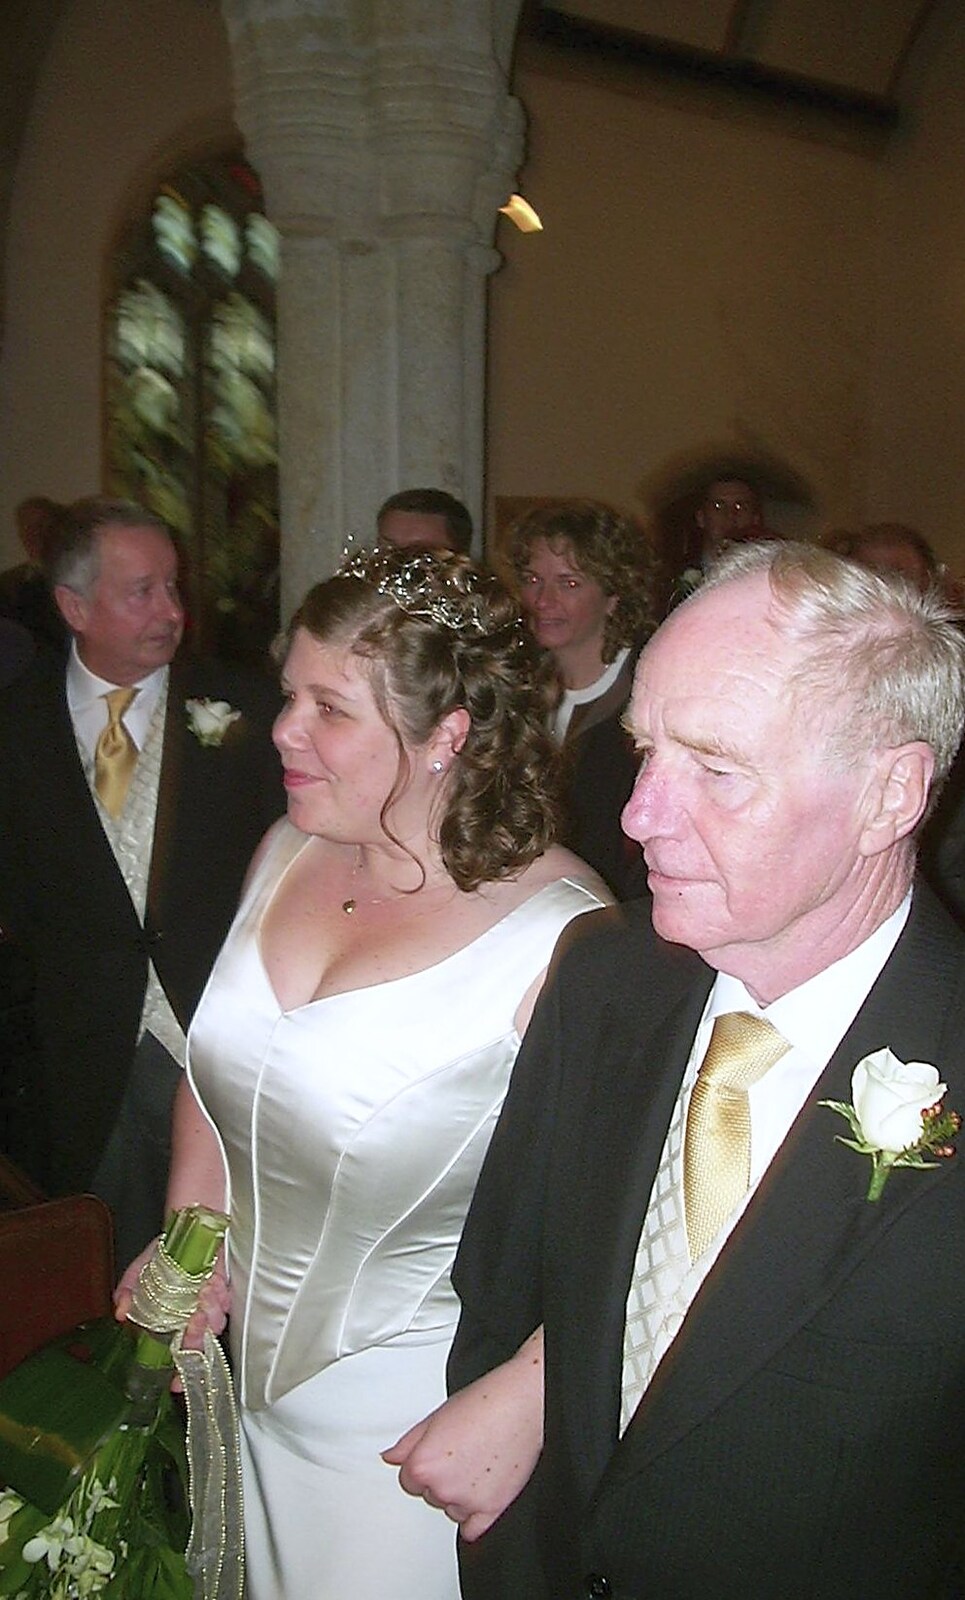 The Old Chap walks Sis down the aisle from Sis's Nearly-Christmas Wedding, Meavy, Dartmoor - 20th December 2003